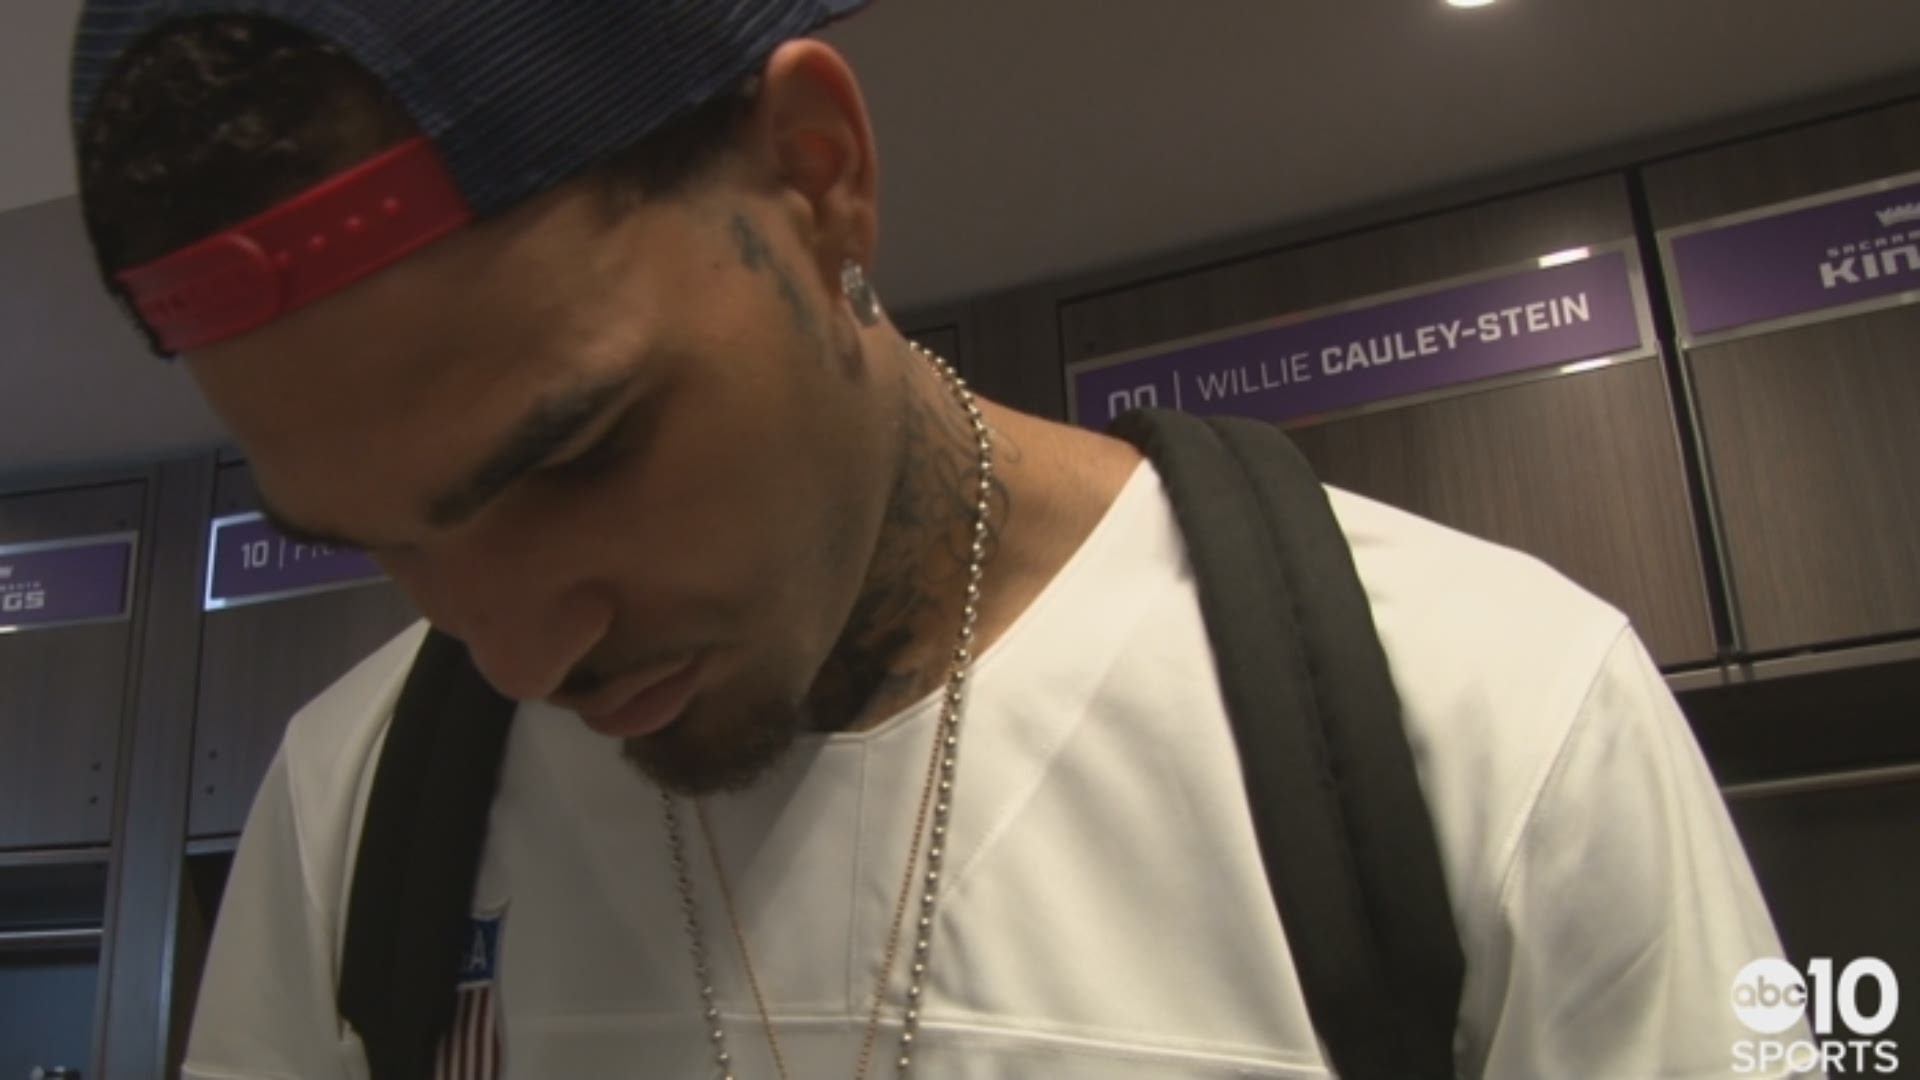 Kings center Willie Cauley-Stein talks about Thursday's better level of competition from his team in Thursday's loss to the Indiana Pacers, at Golden 1 Center in Sacramento.